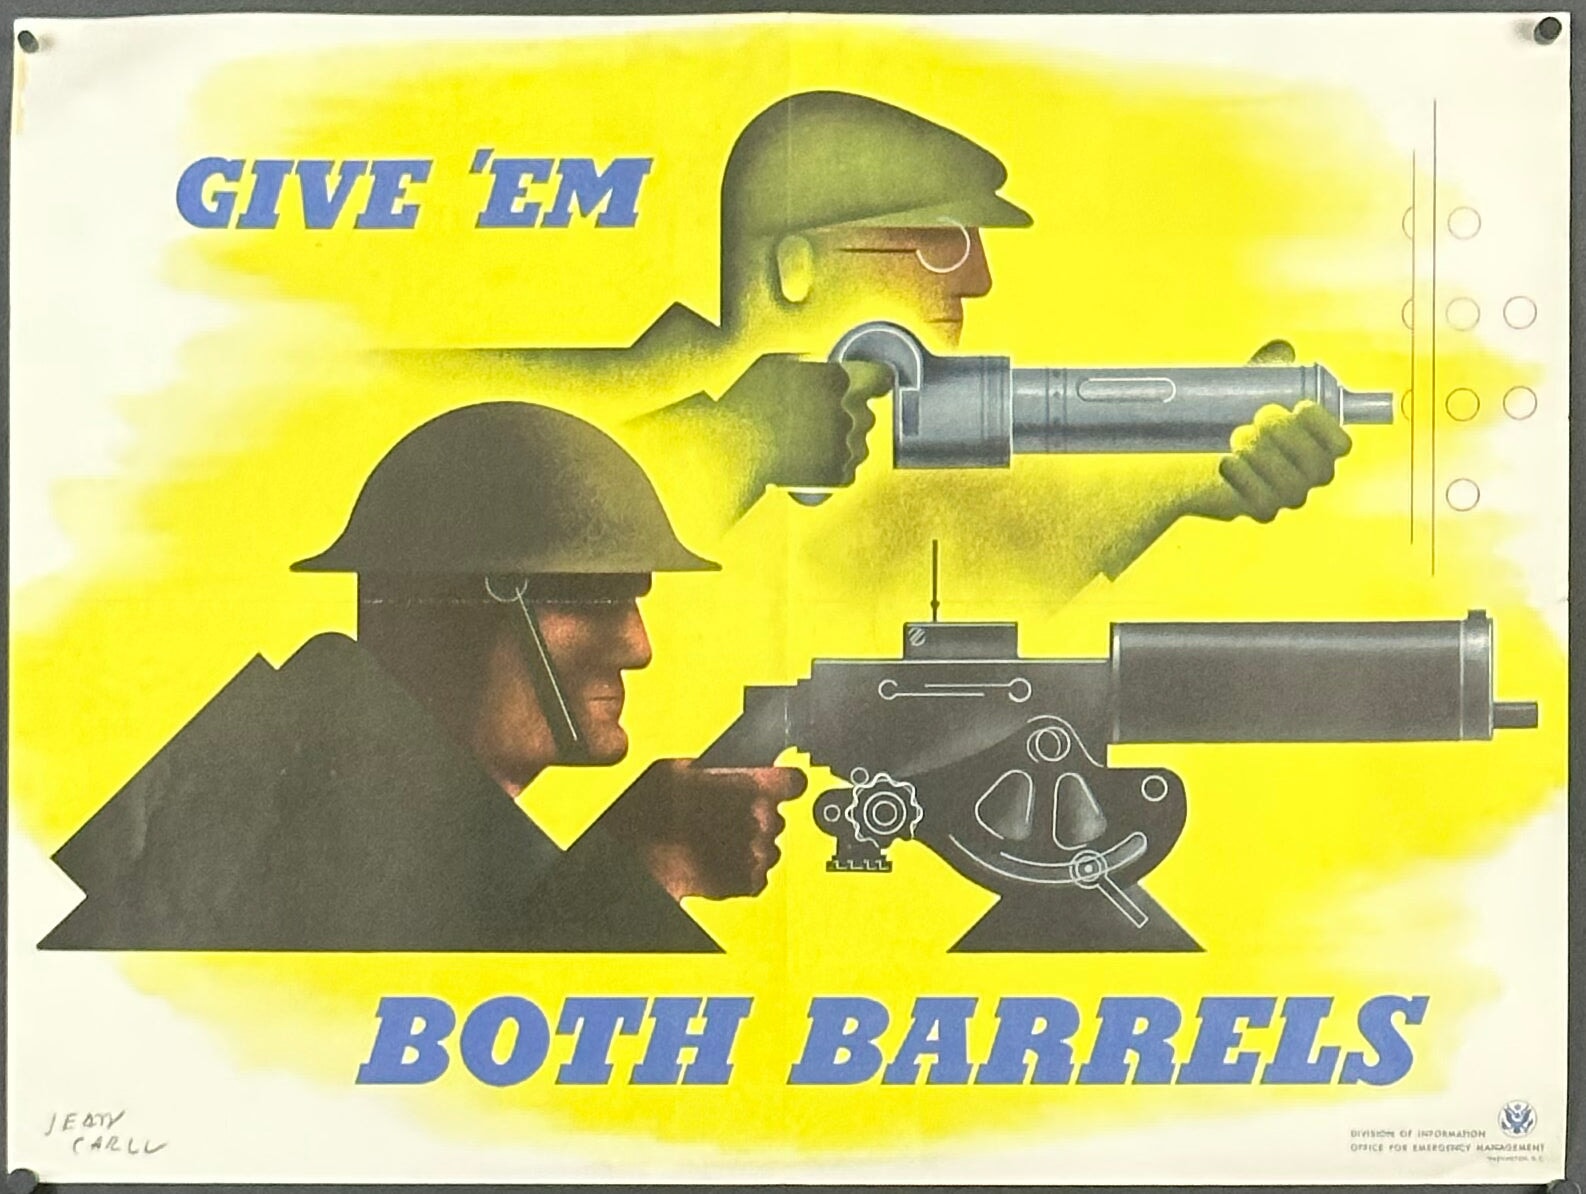 "Give 'Em Both Barrels" WWII Home Front Propaganda Poster by Jean Carlu (1941) - posterpalace.com